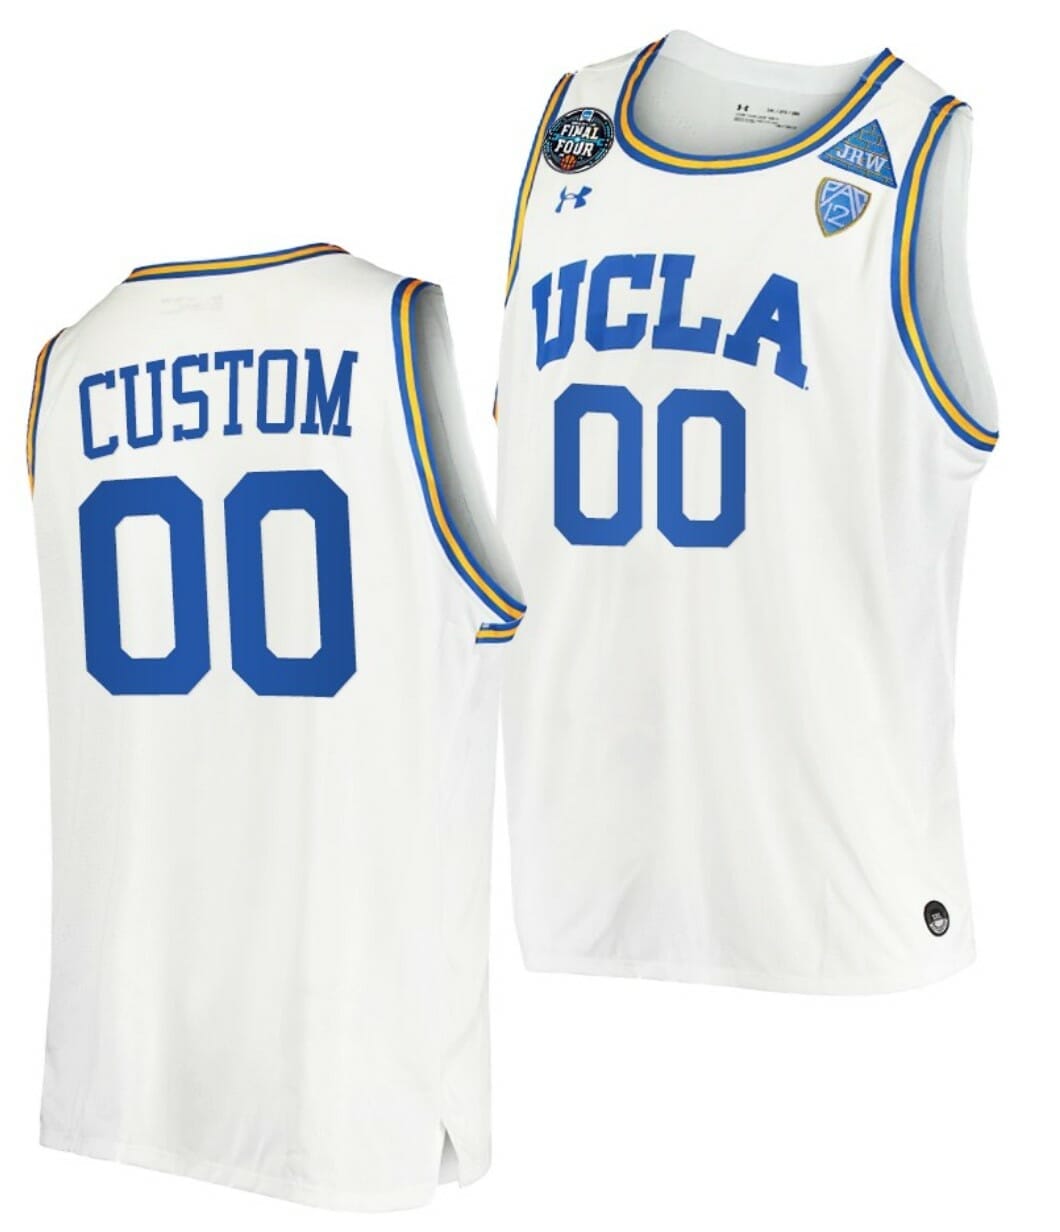 Custom NCAA Baseball Jerseys UCLA Bruins Jersey Name and Number College Replica White